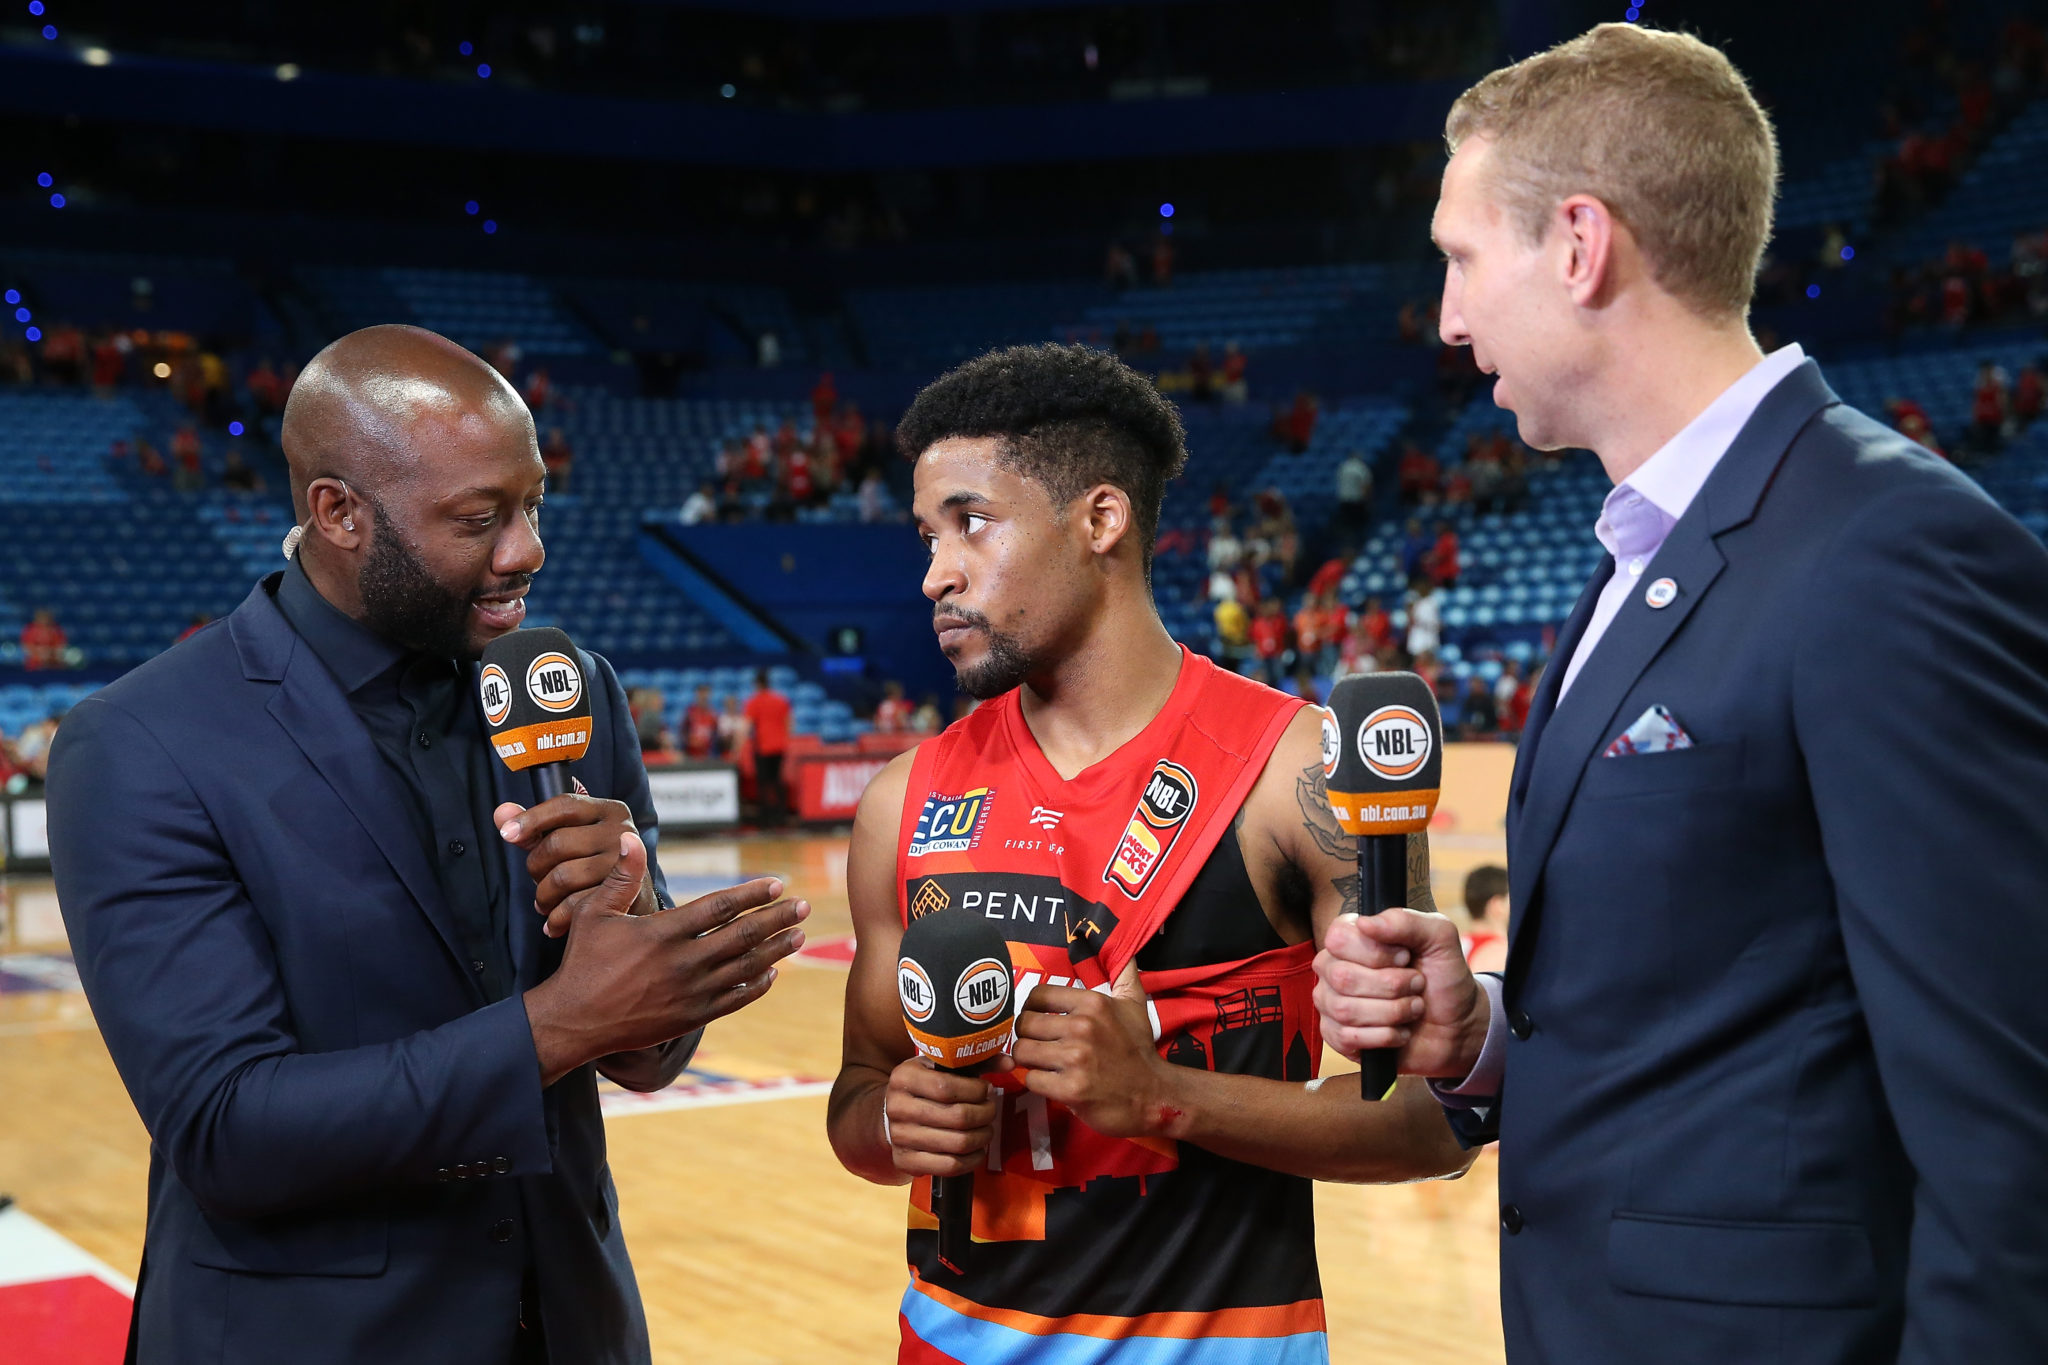 PERTH, AUSTRALIA - JANUARY 25: Bryce Cotton of the Wildcats talks with NBL commentators Corey Williams and Shawn Redhage after winning the round 15 NBL match between the Perth Wildcats and the Adelaide 36ers at Perth Arena on January 25, 2019 in Perth, Australia. (Photo by Paul Kane/Getty Images)